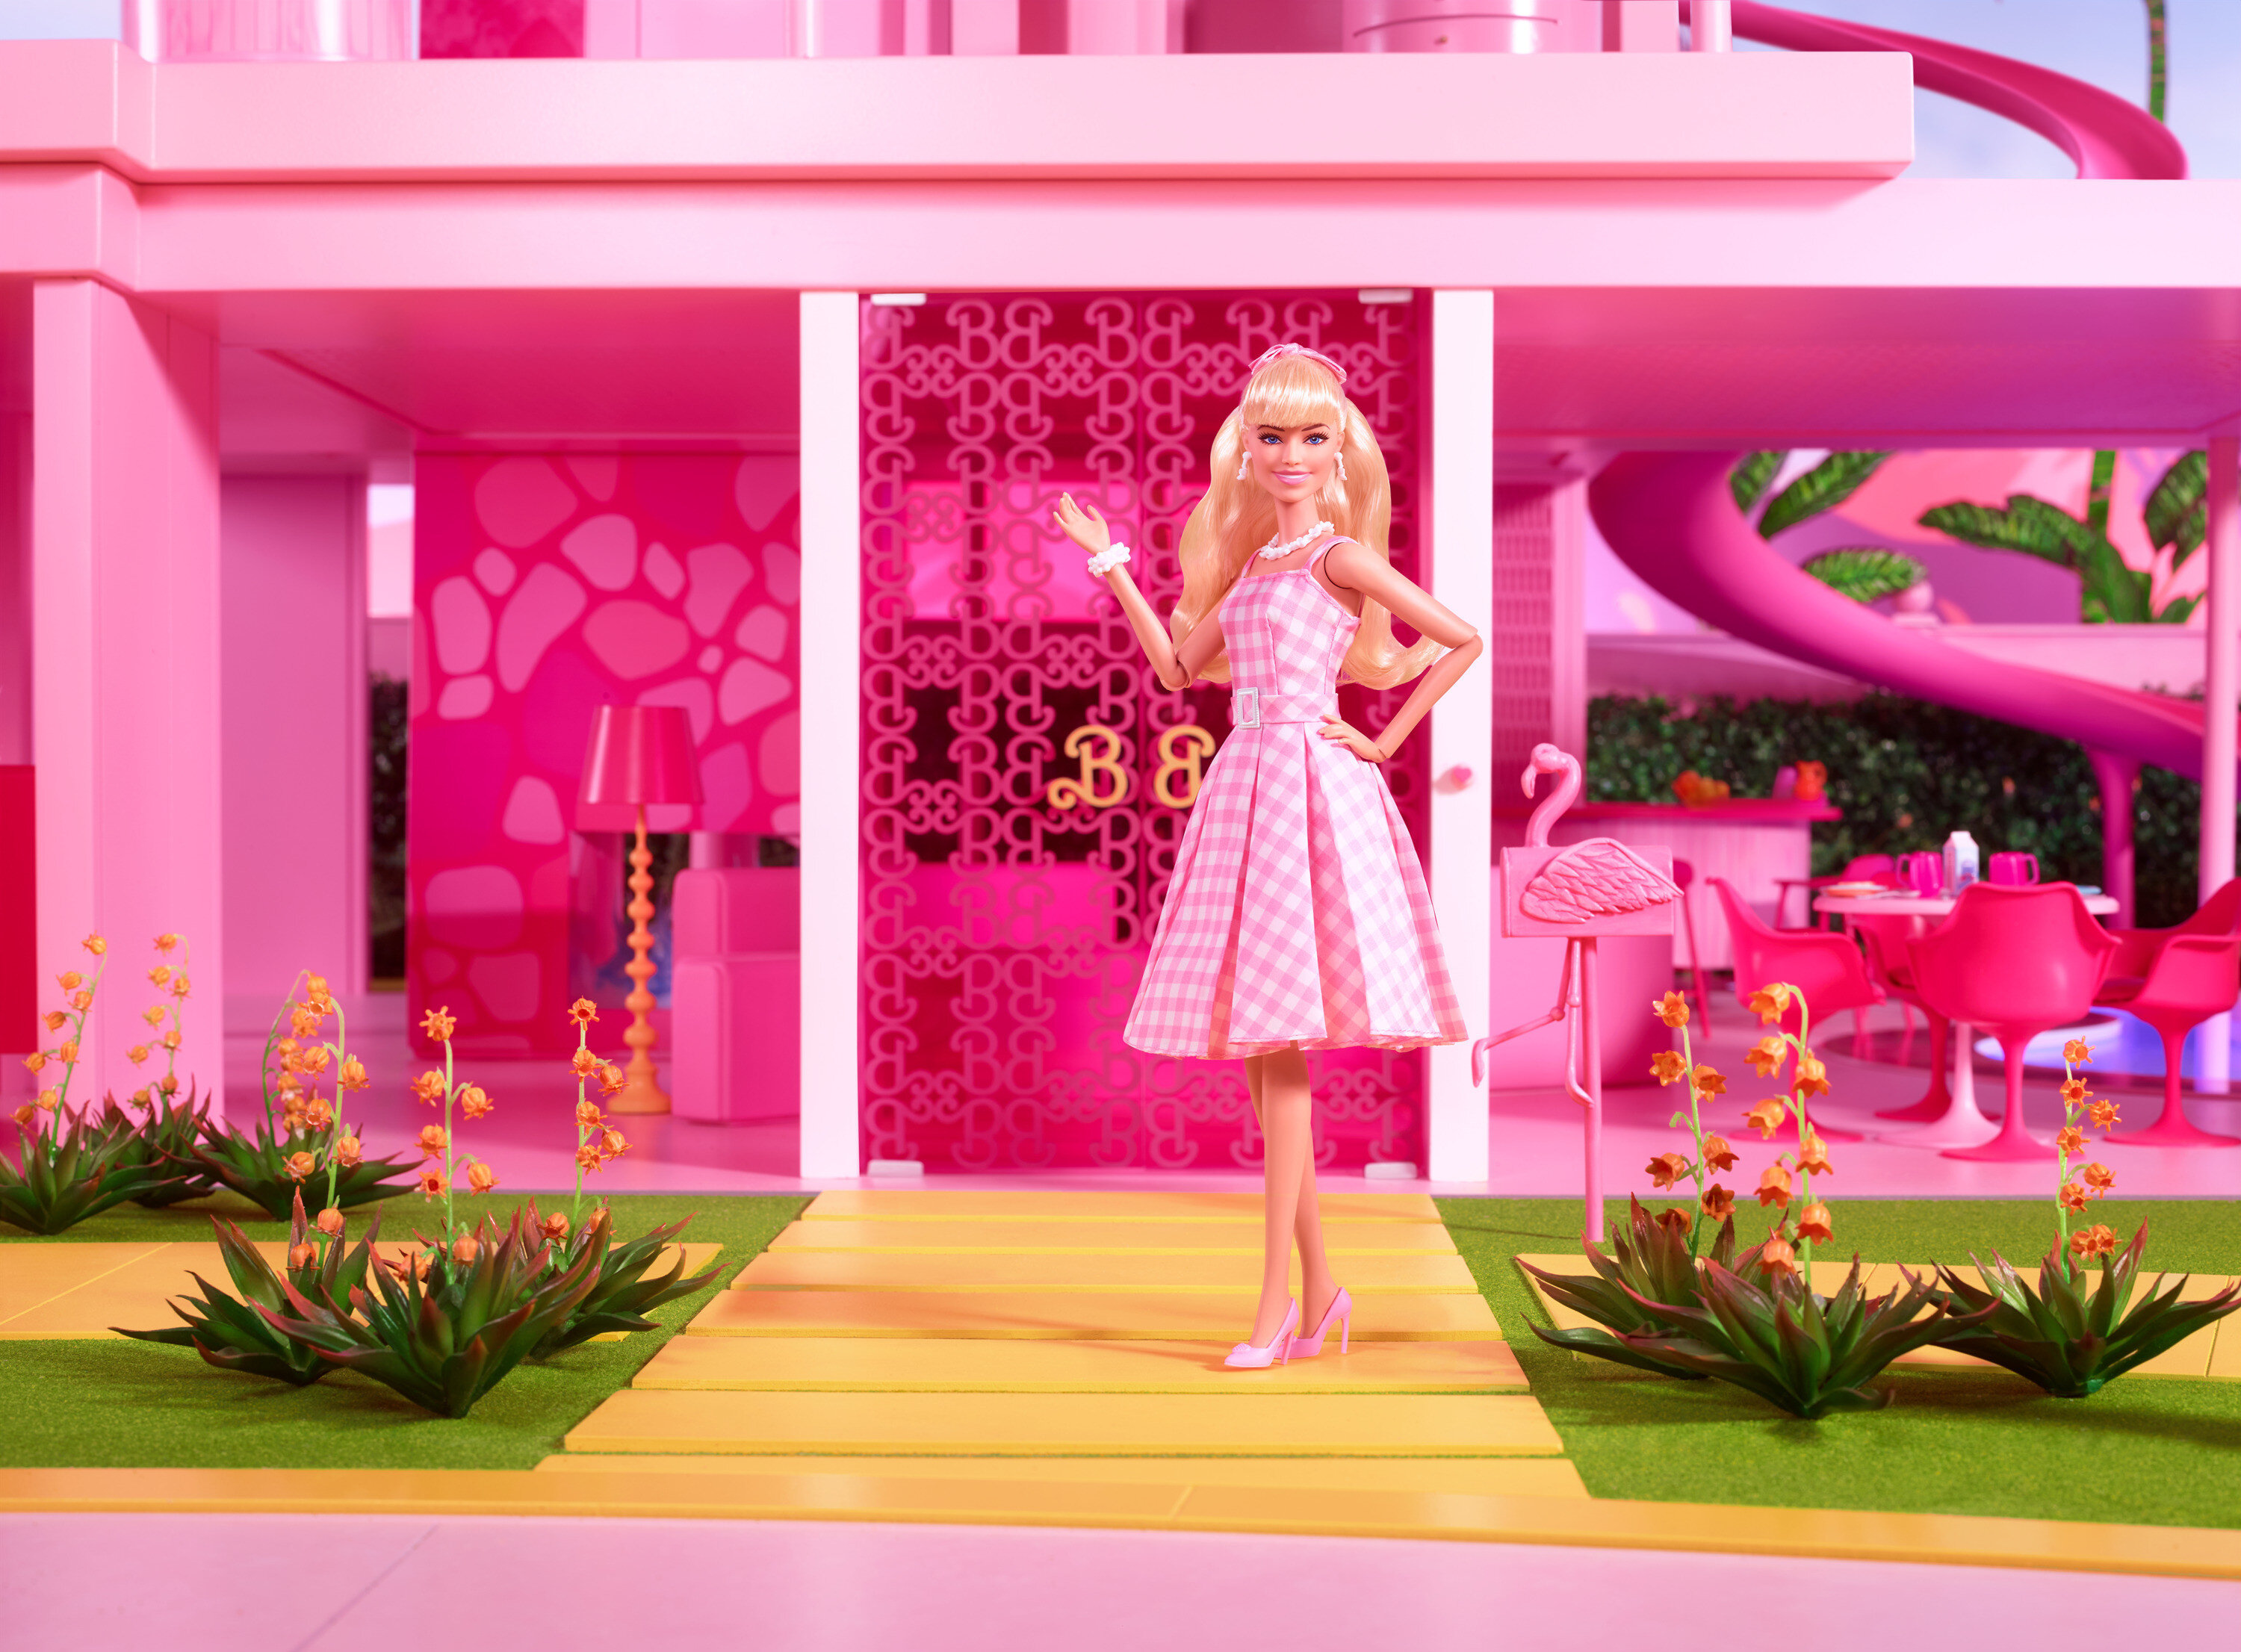 Barbie The Movie Collectible Doll, Margot Robbie as Barbie in Pink Gingham Dress, Toy for 3 Years and Up - image 4 of 8